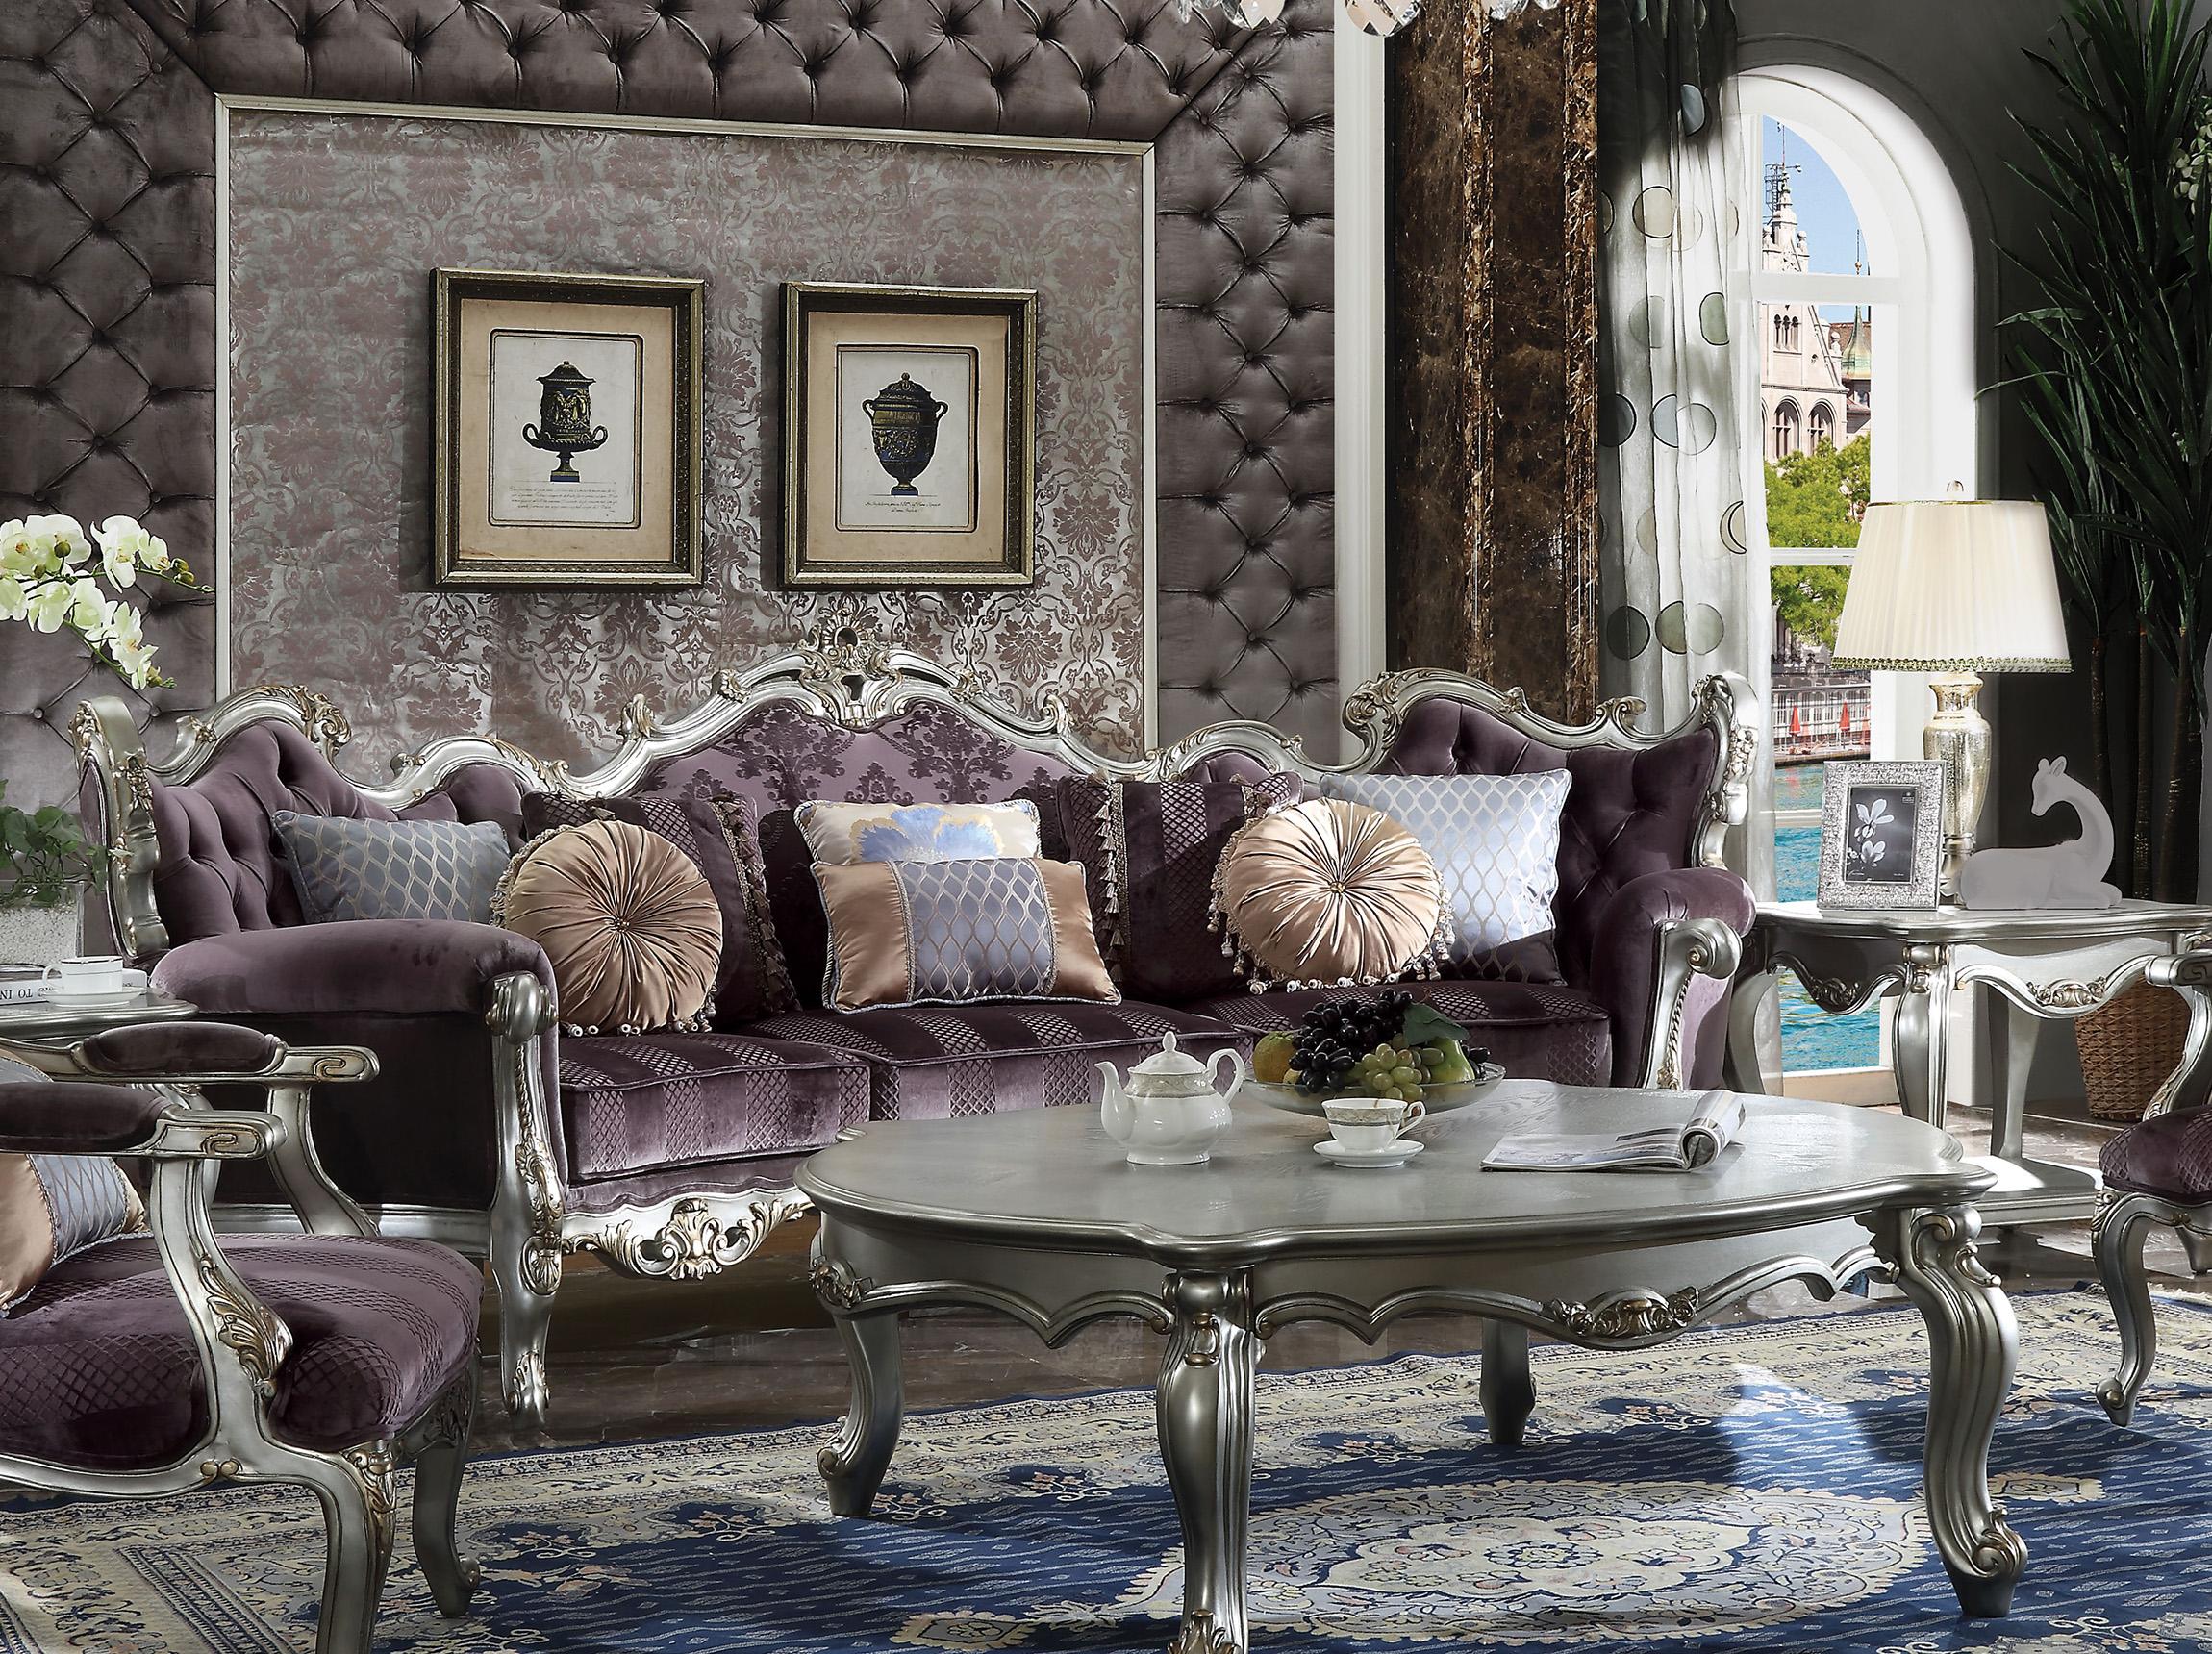 Classic, Traditional Sofa Picardy II 53465 53465-Picardy II in Platinum, Antique, Violet Velvet